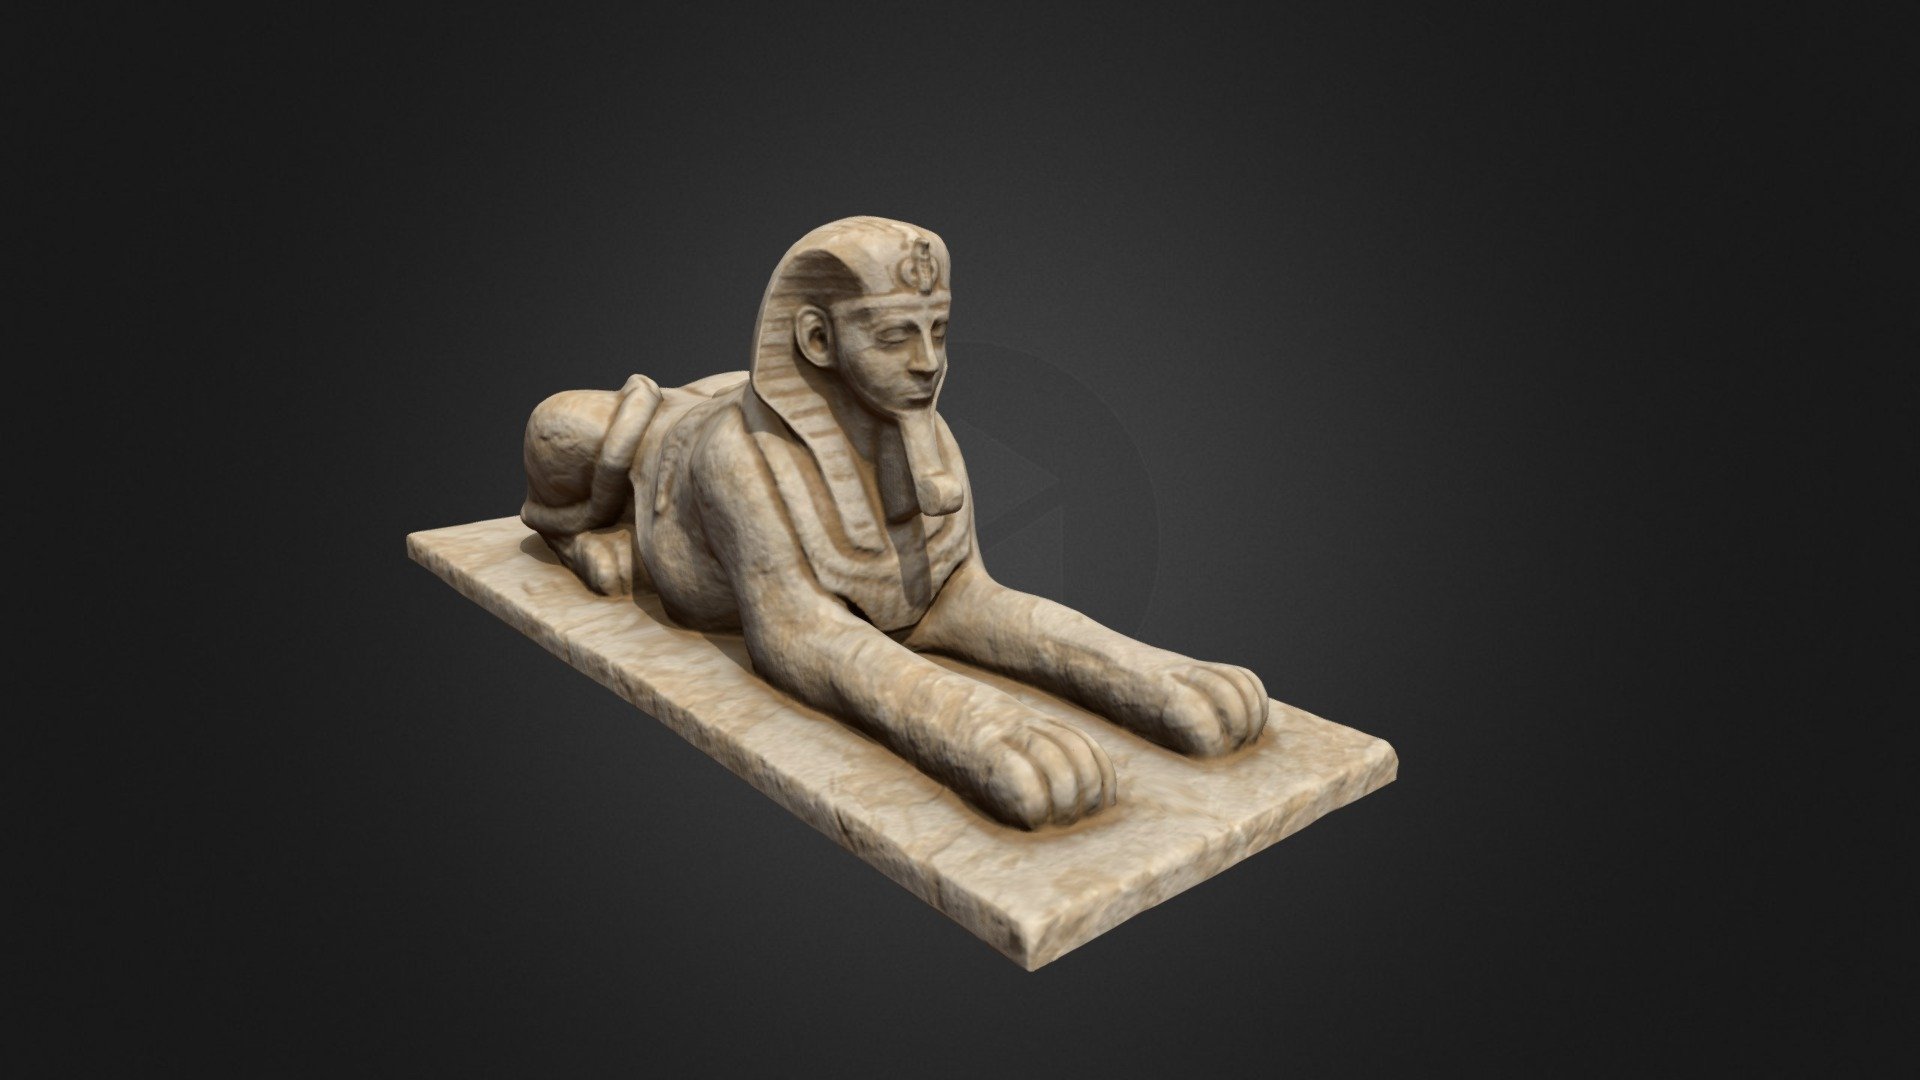 Low poly model of Sphynx from Egypt
Part of the Modular Museum HQ Asset (Unity) 3d model